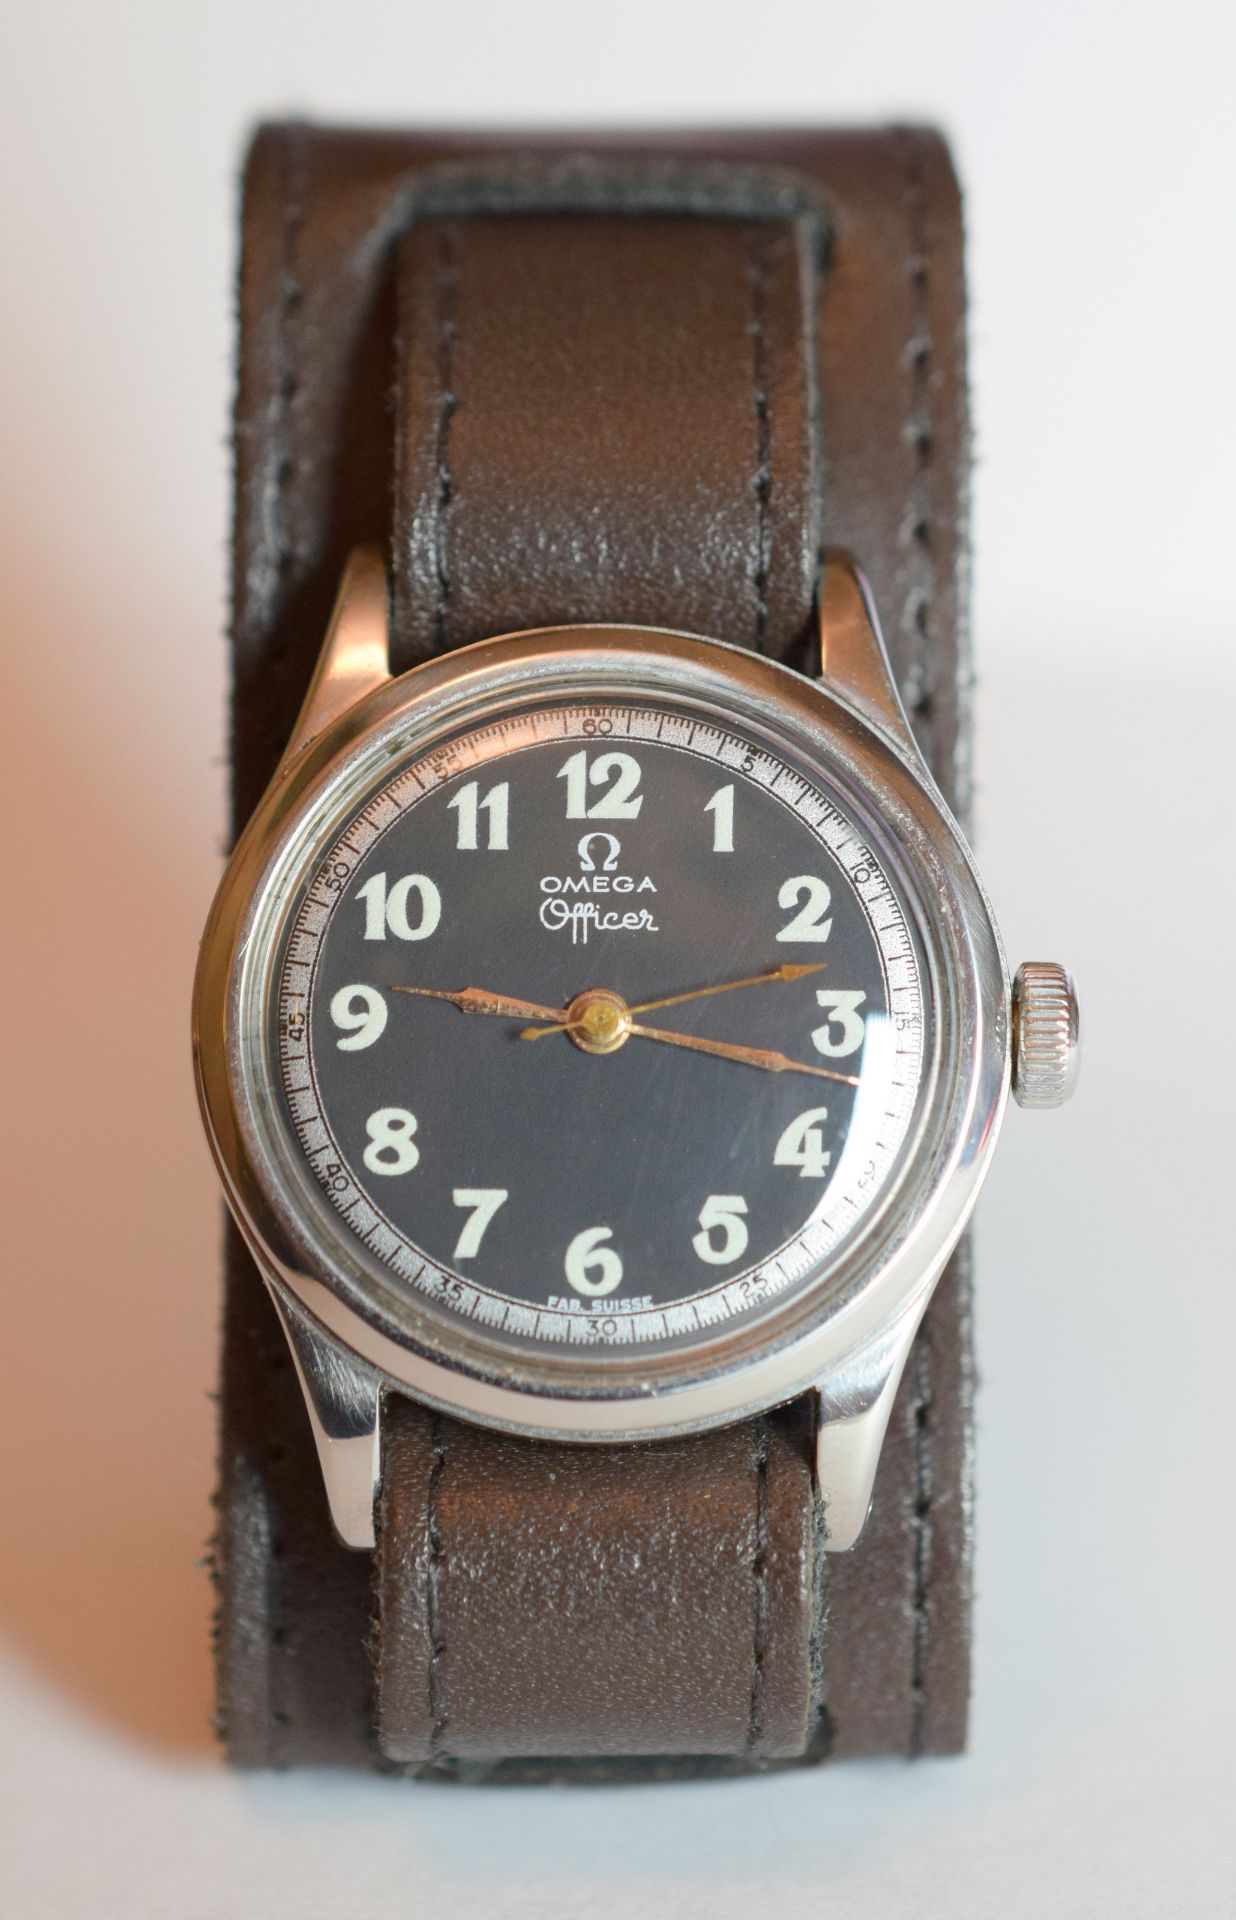 WW2 Omega Officers Military Watch c1938 - Image 4 of 8